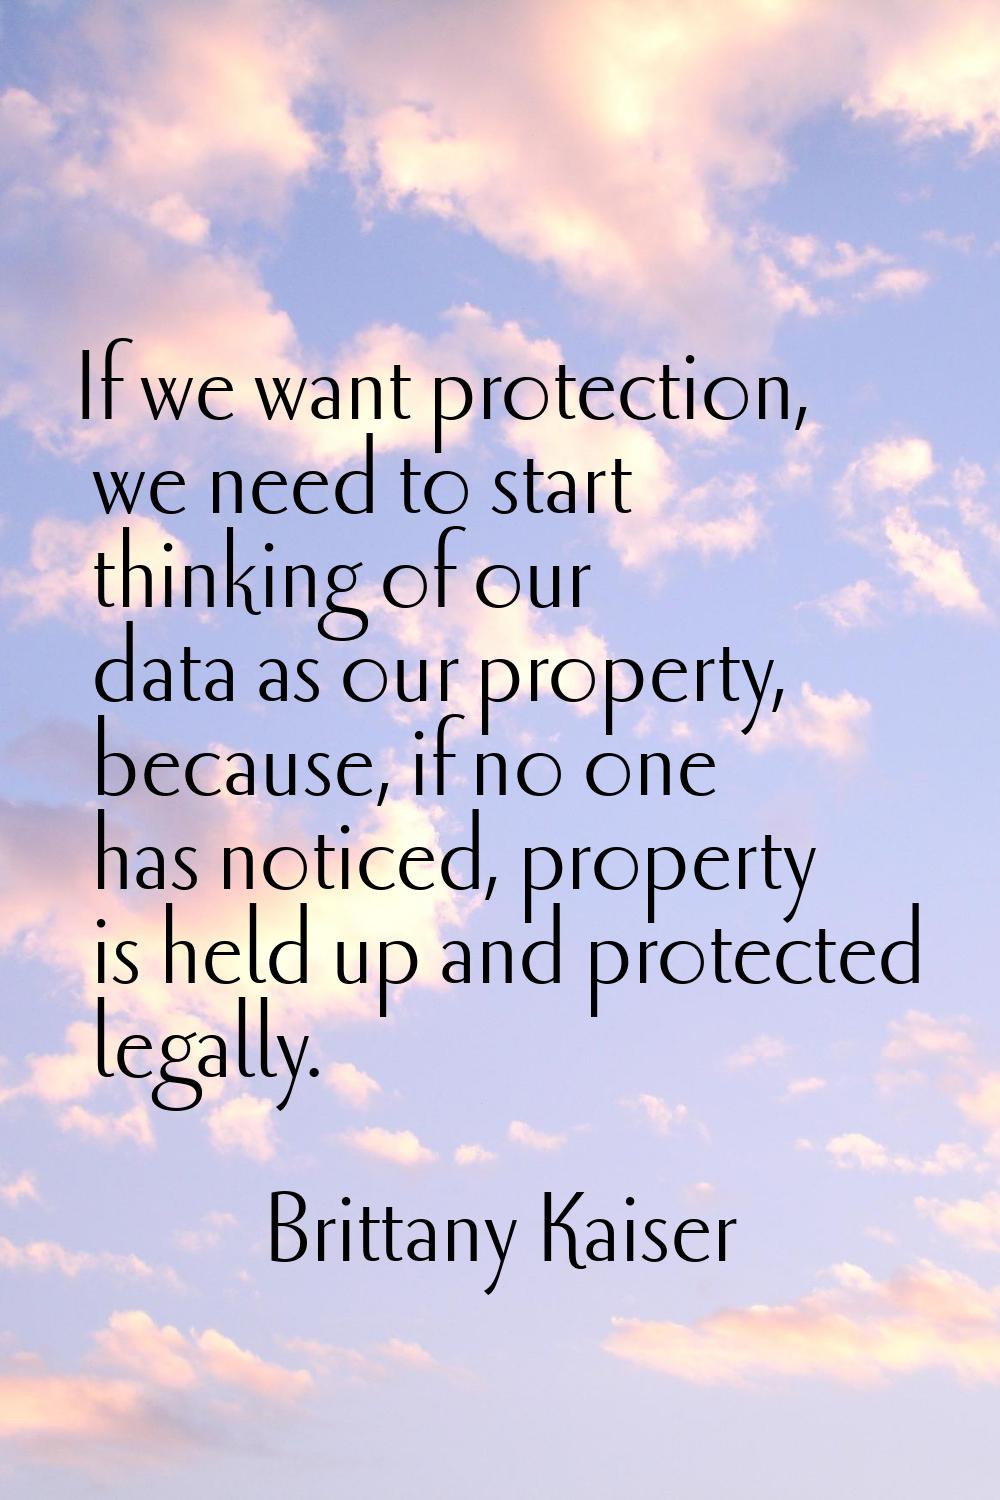 If we want protection, we need to start thinking of our data as our property, because, if no one ha